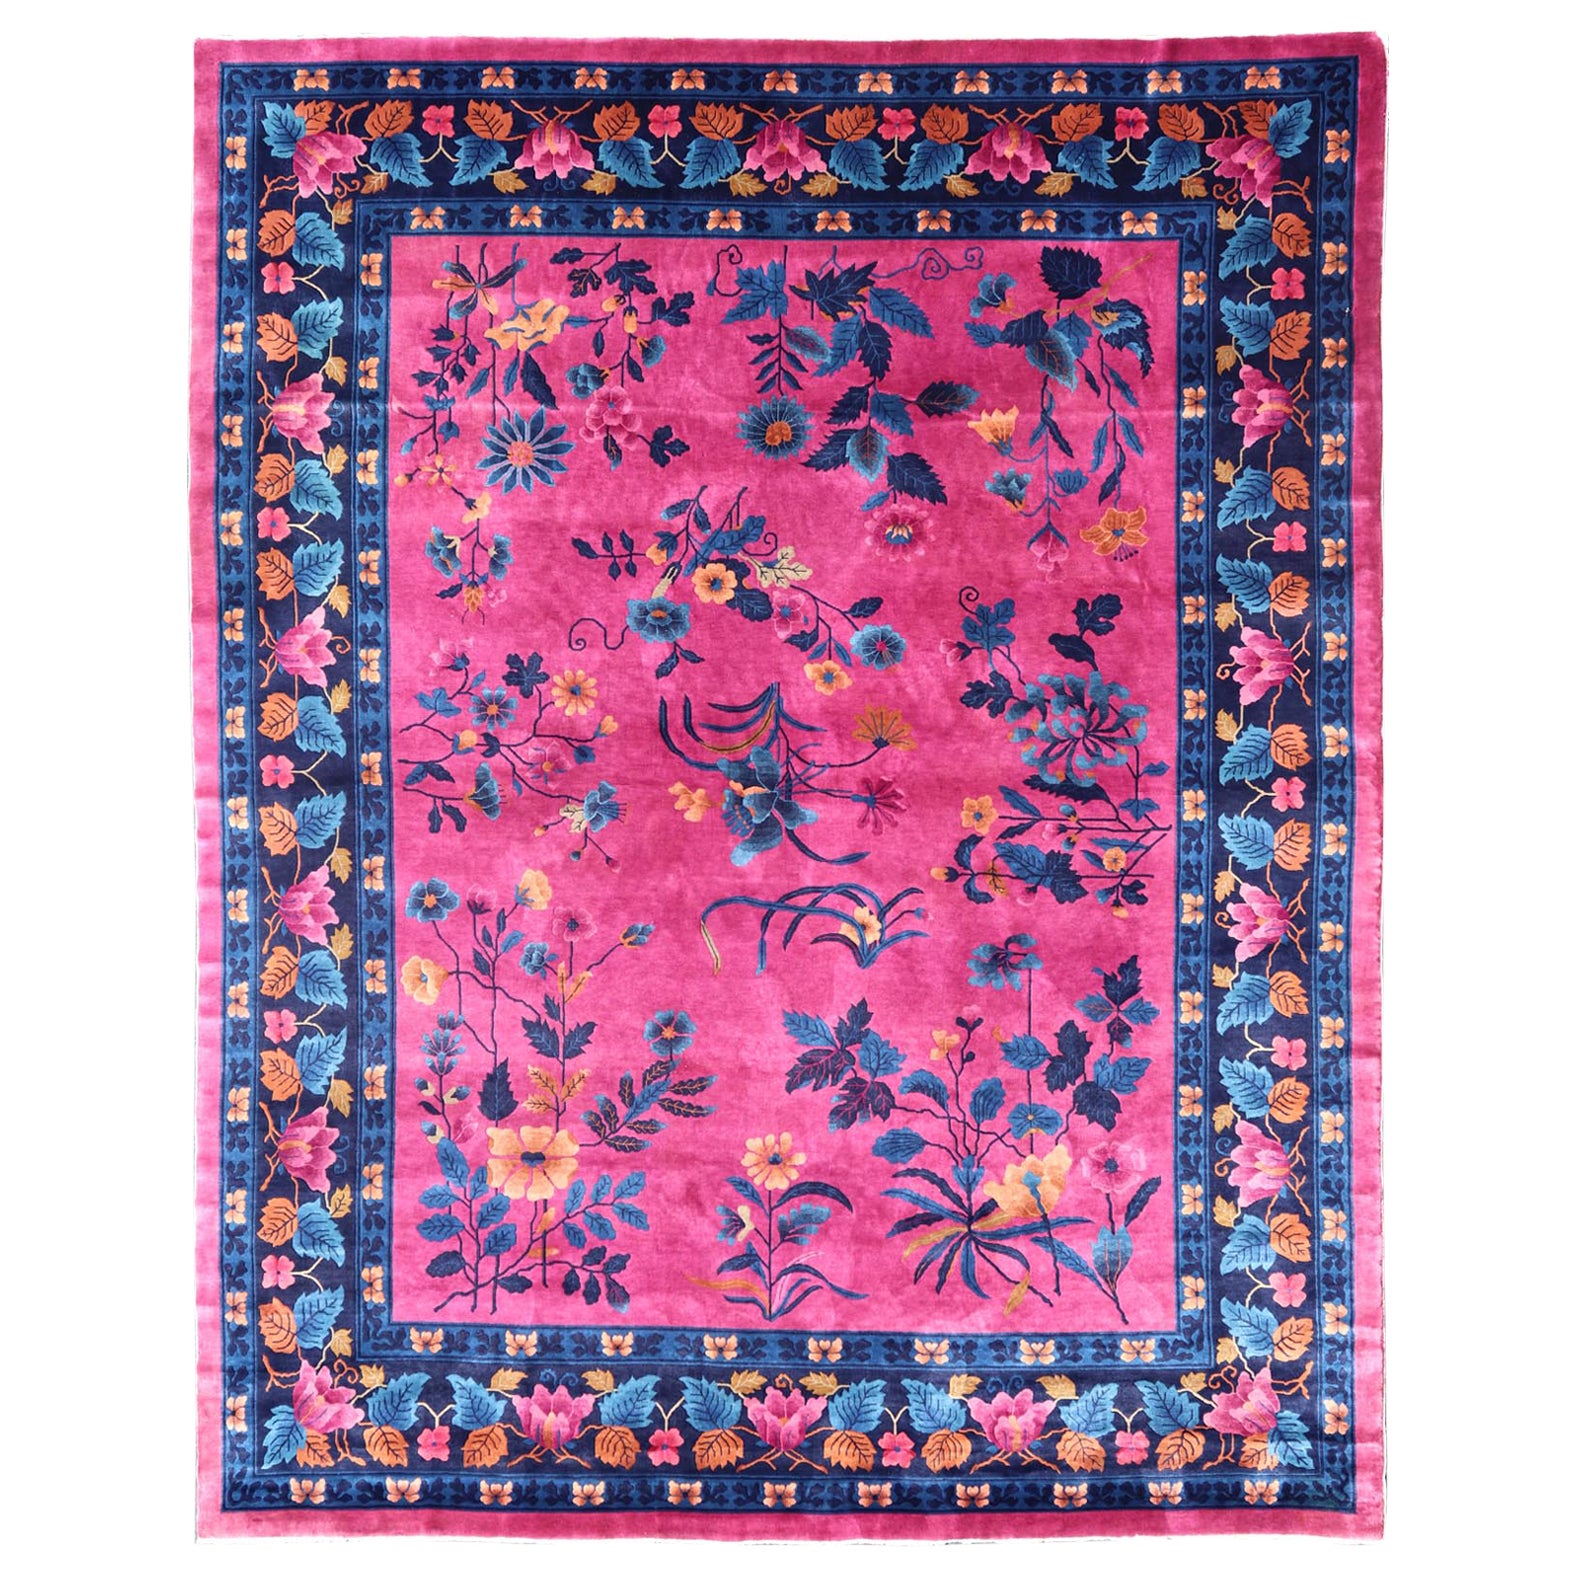 Magenta Background Chinese Art Deco Rug with Large Vining Flowers and Leaves 